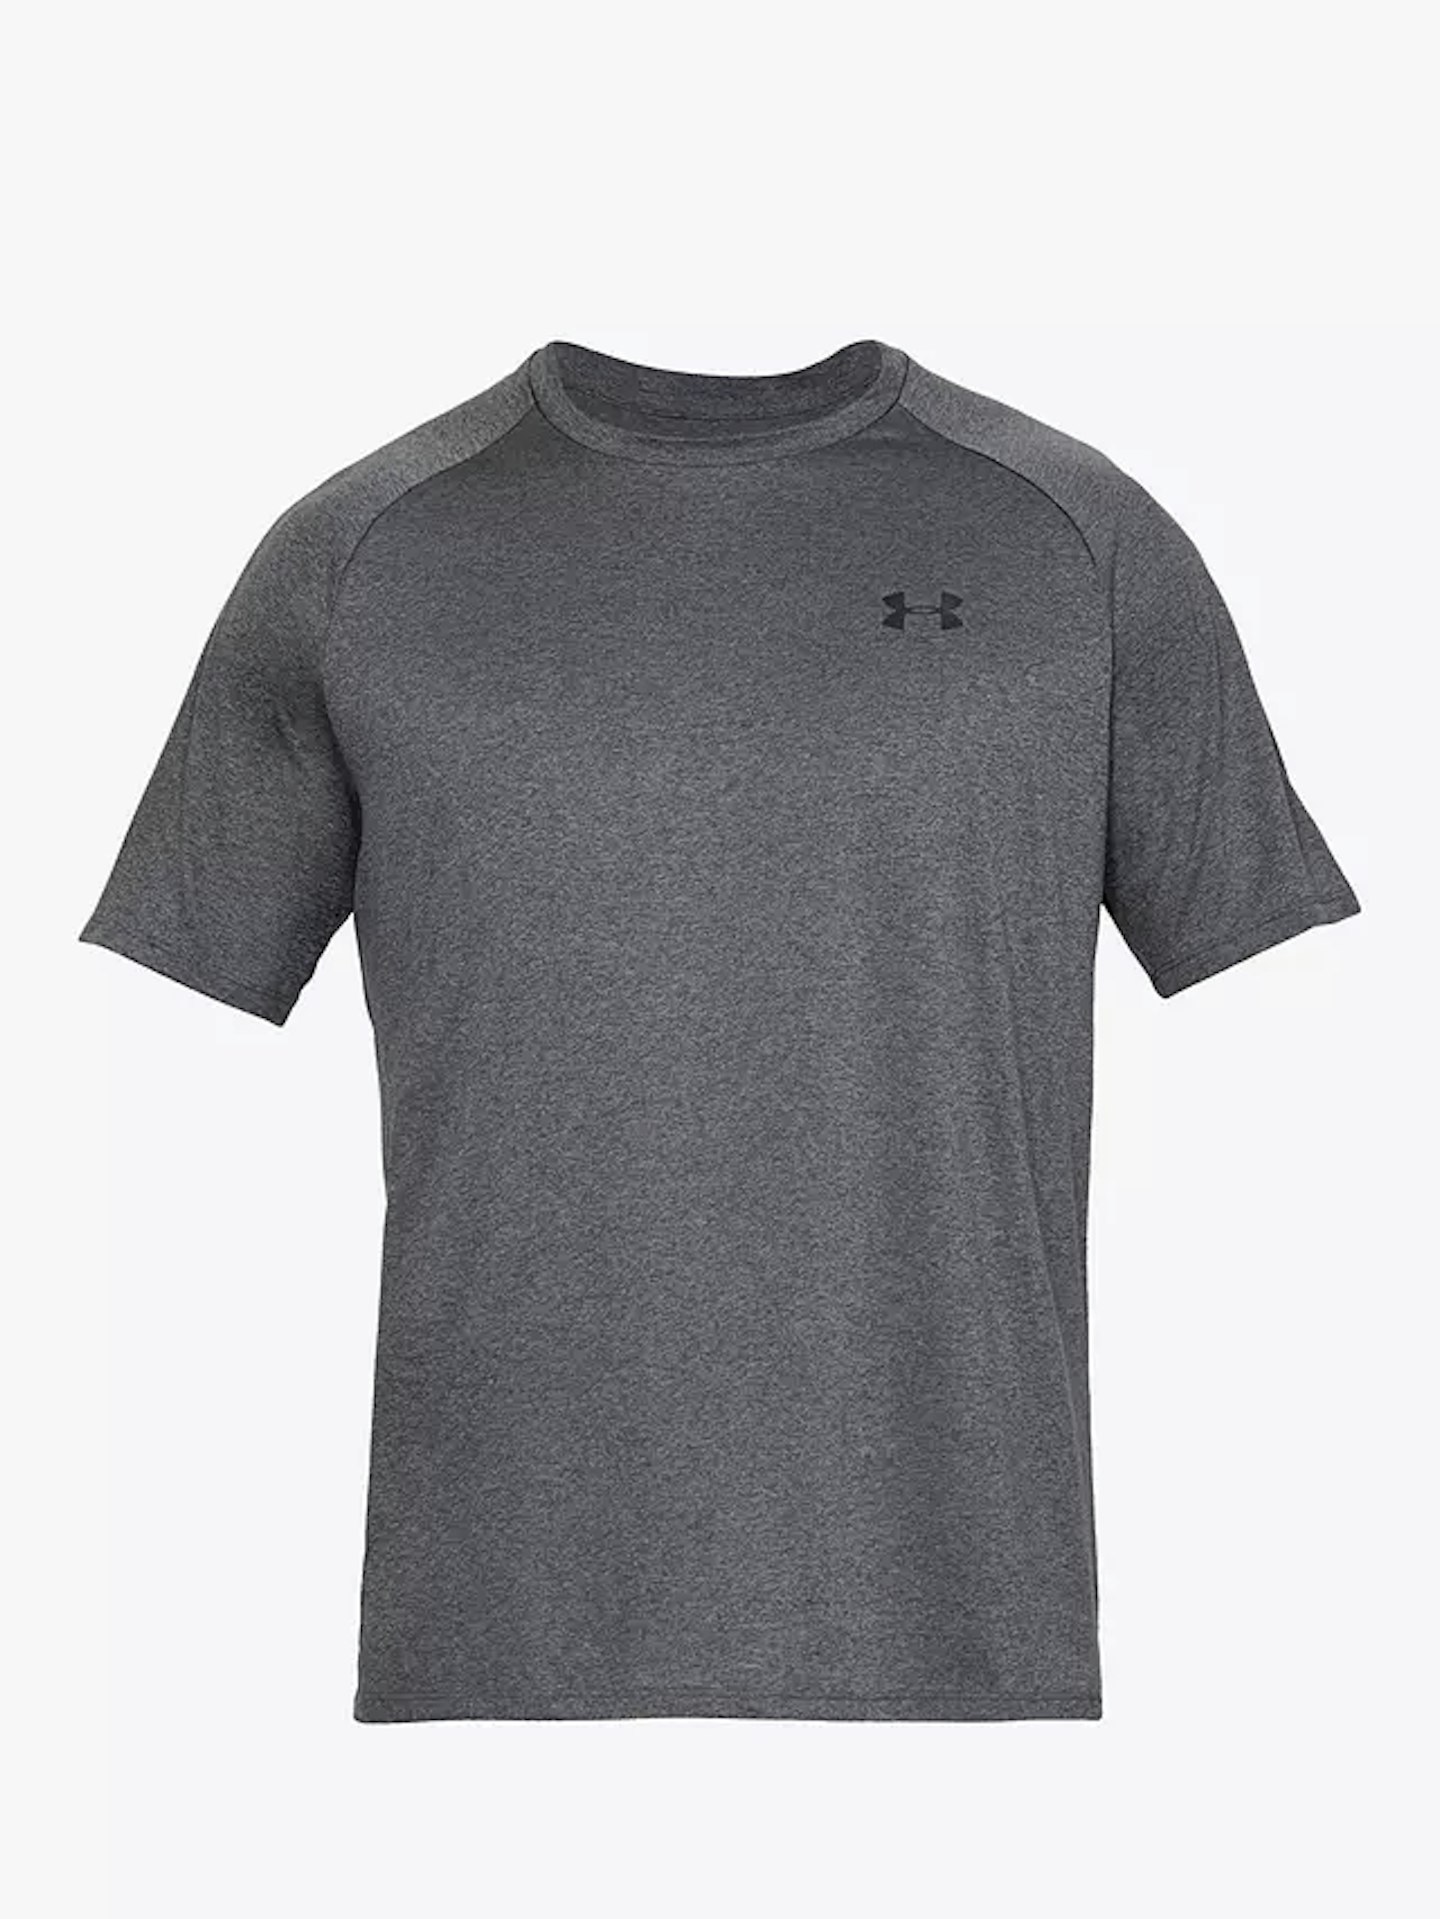 Under Armour Gym Top